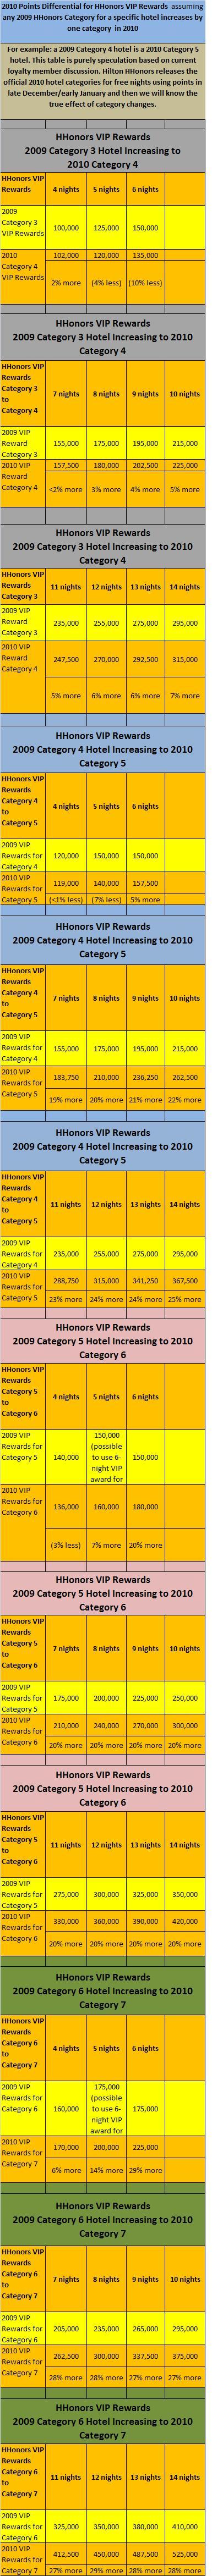 HHonors VIP Awards in 2010 for a hotels one category higher than 2009